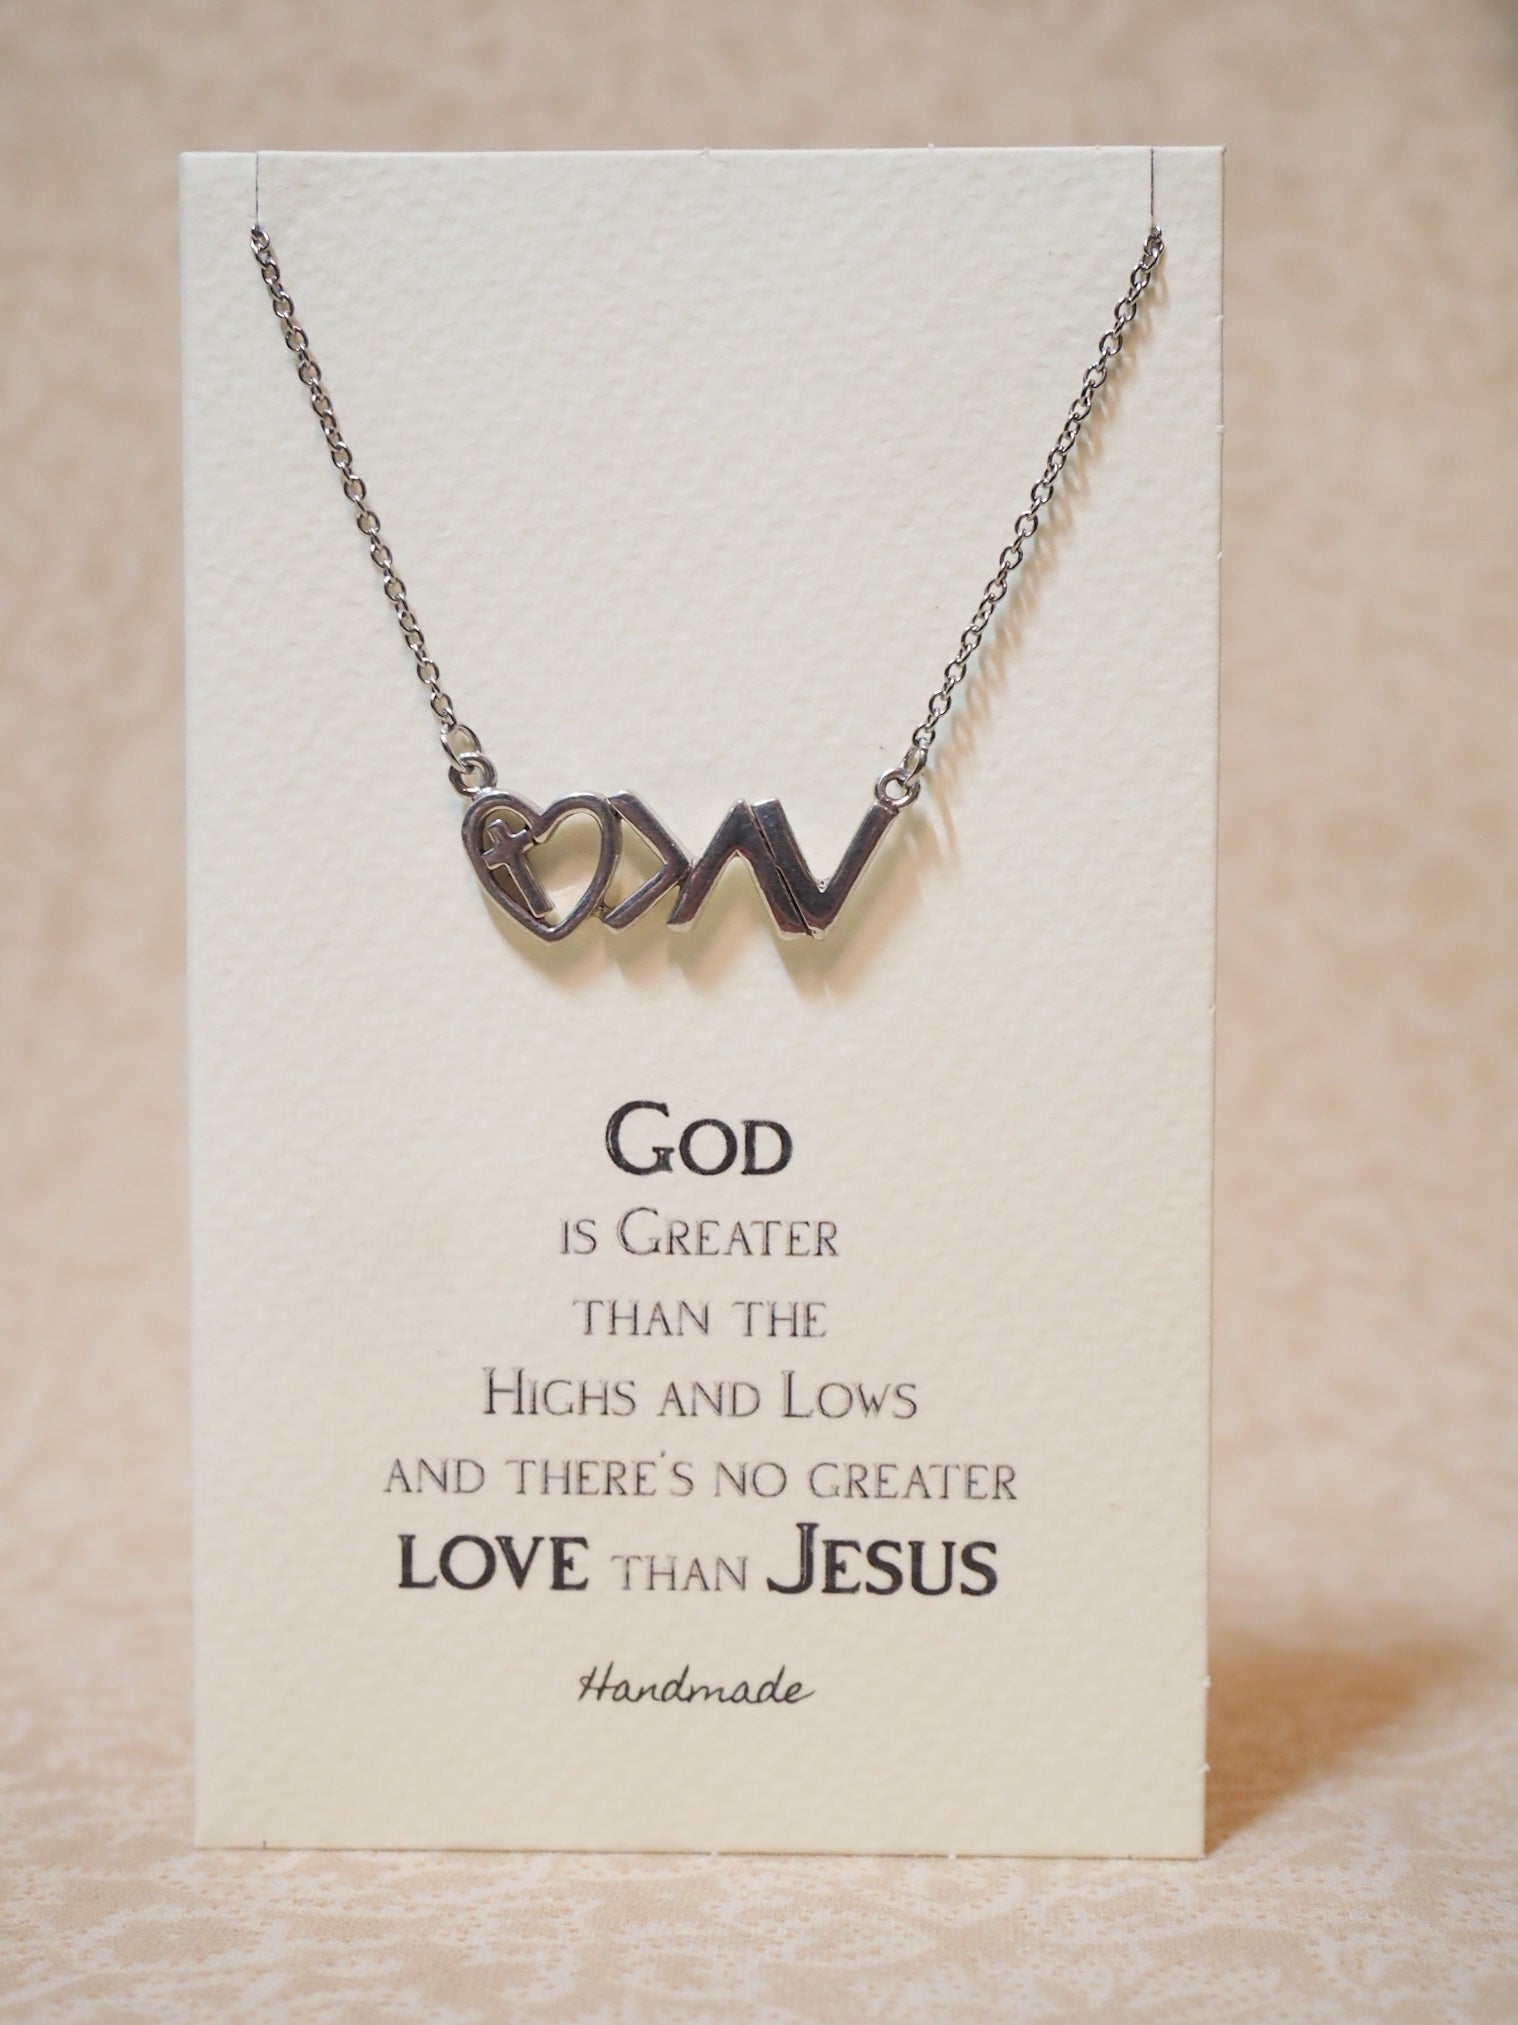 Joyfulle Magdalene Heart with God is Greater High Low Symbols Pendant Necklace, Gifts for Women with Inspirational Greeting Card